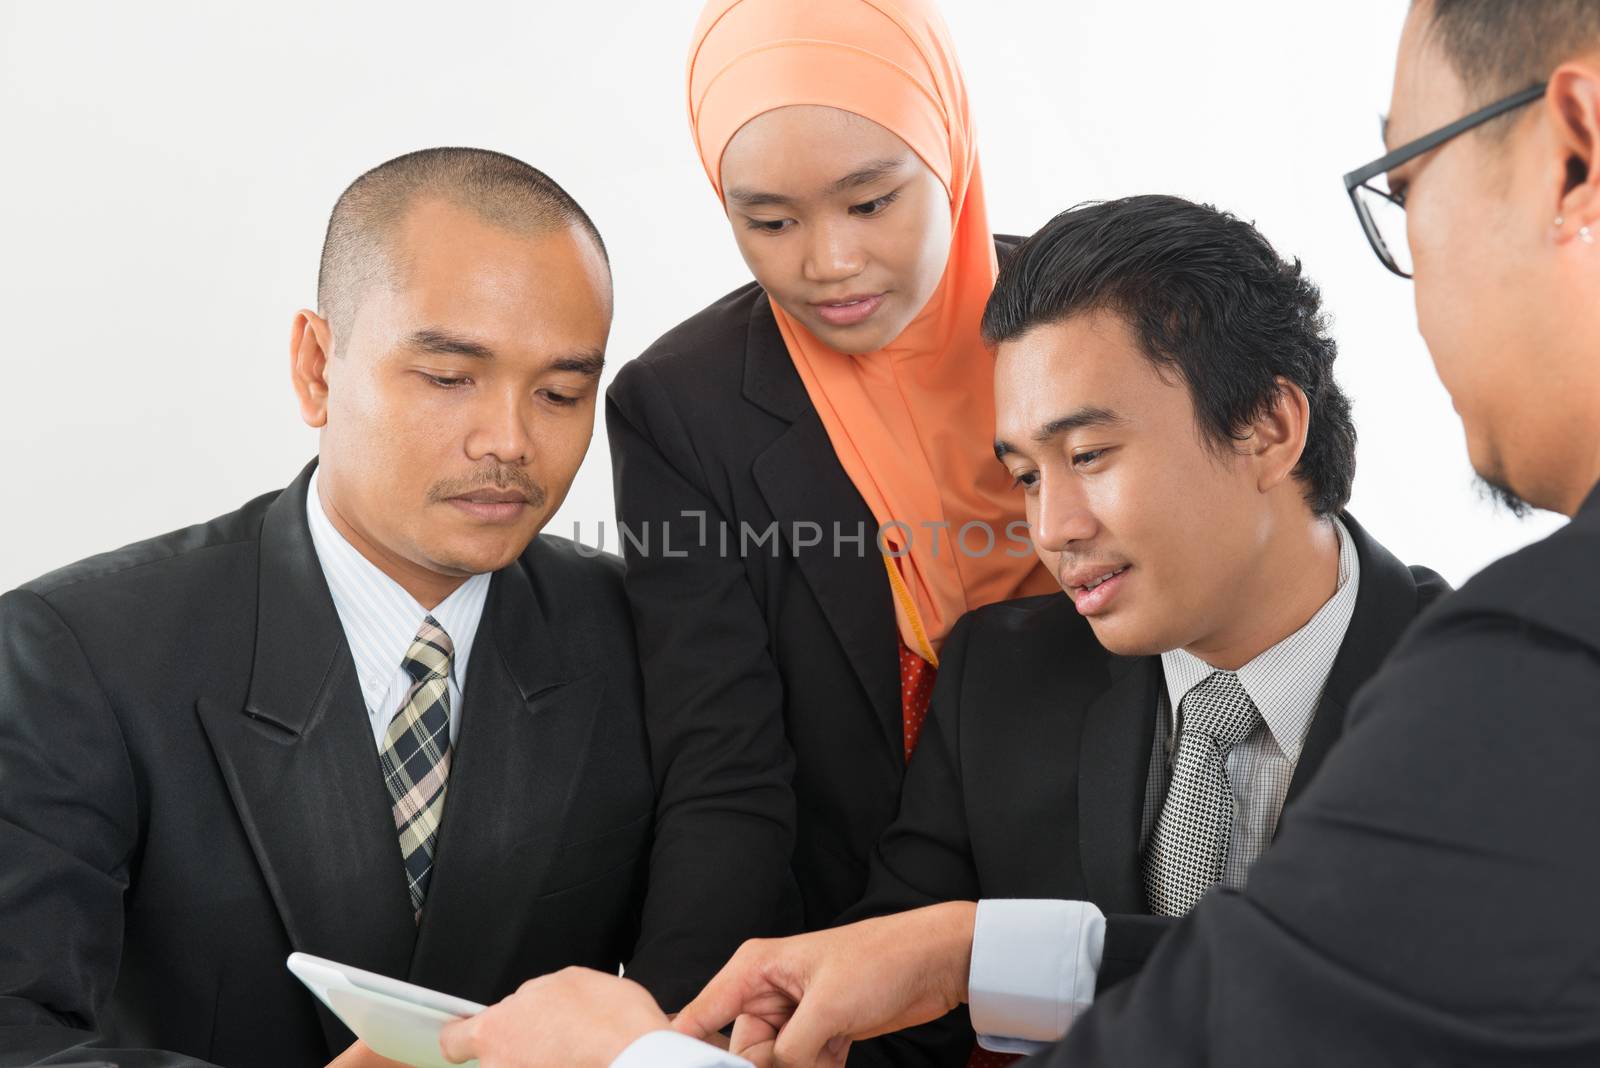 Group of Malaysian businesspeople meeting or having discussion on desk inside office room.